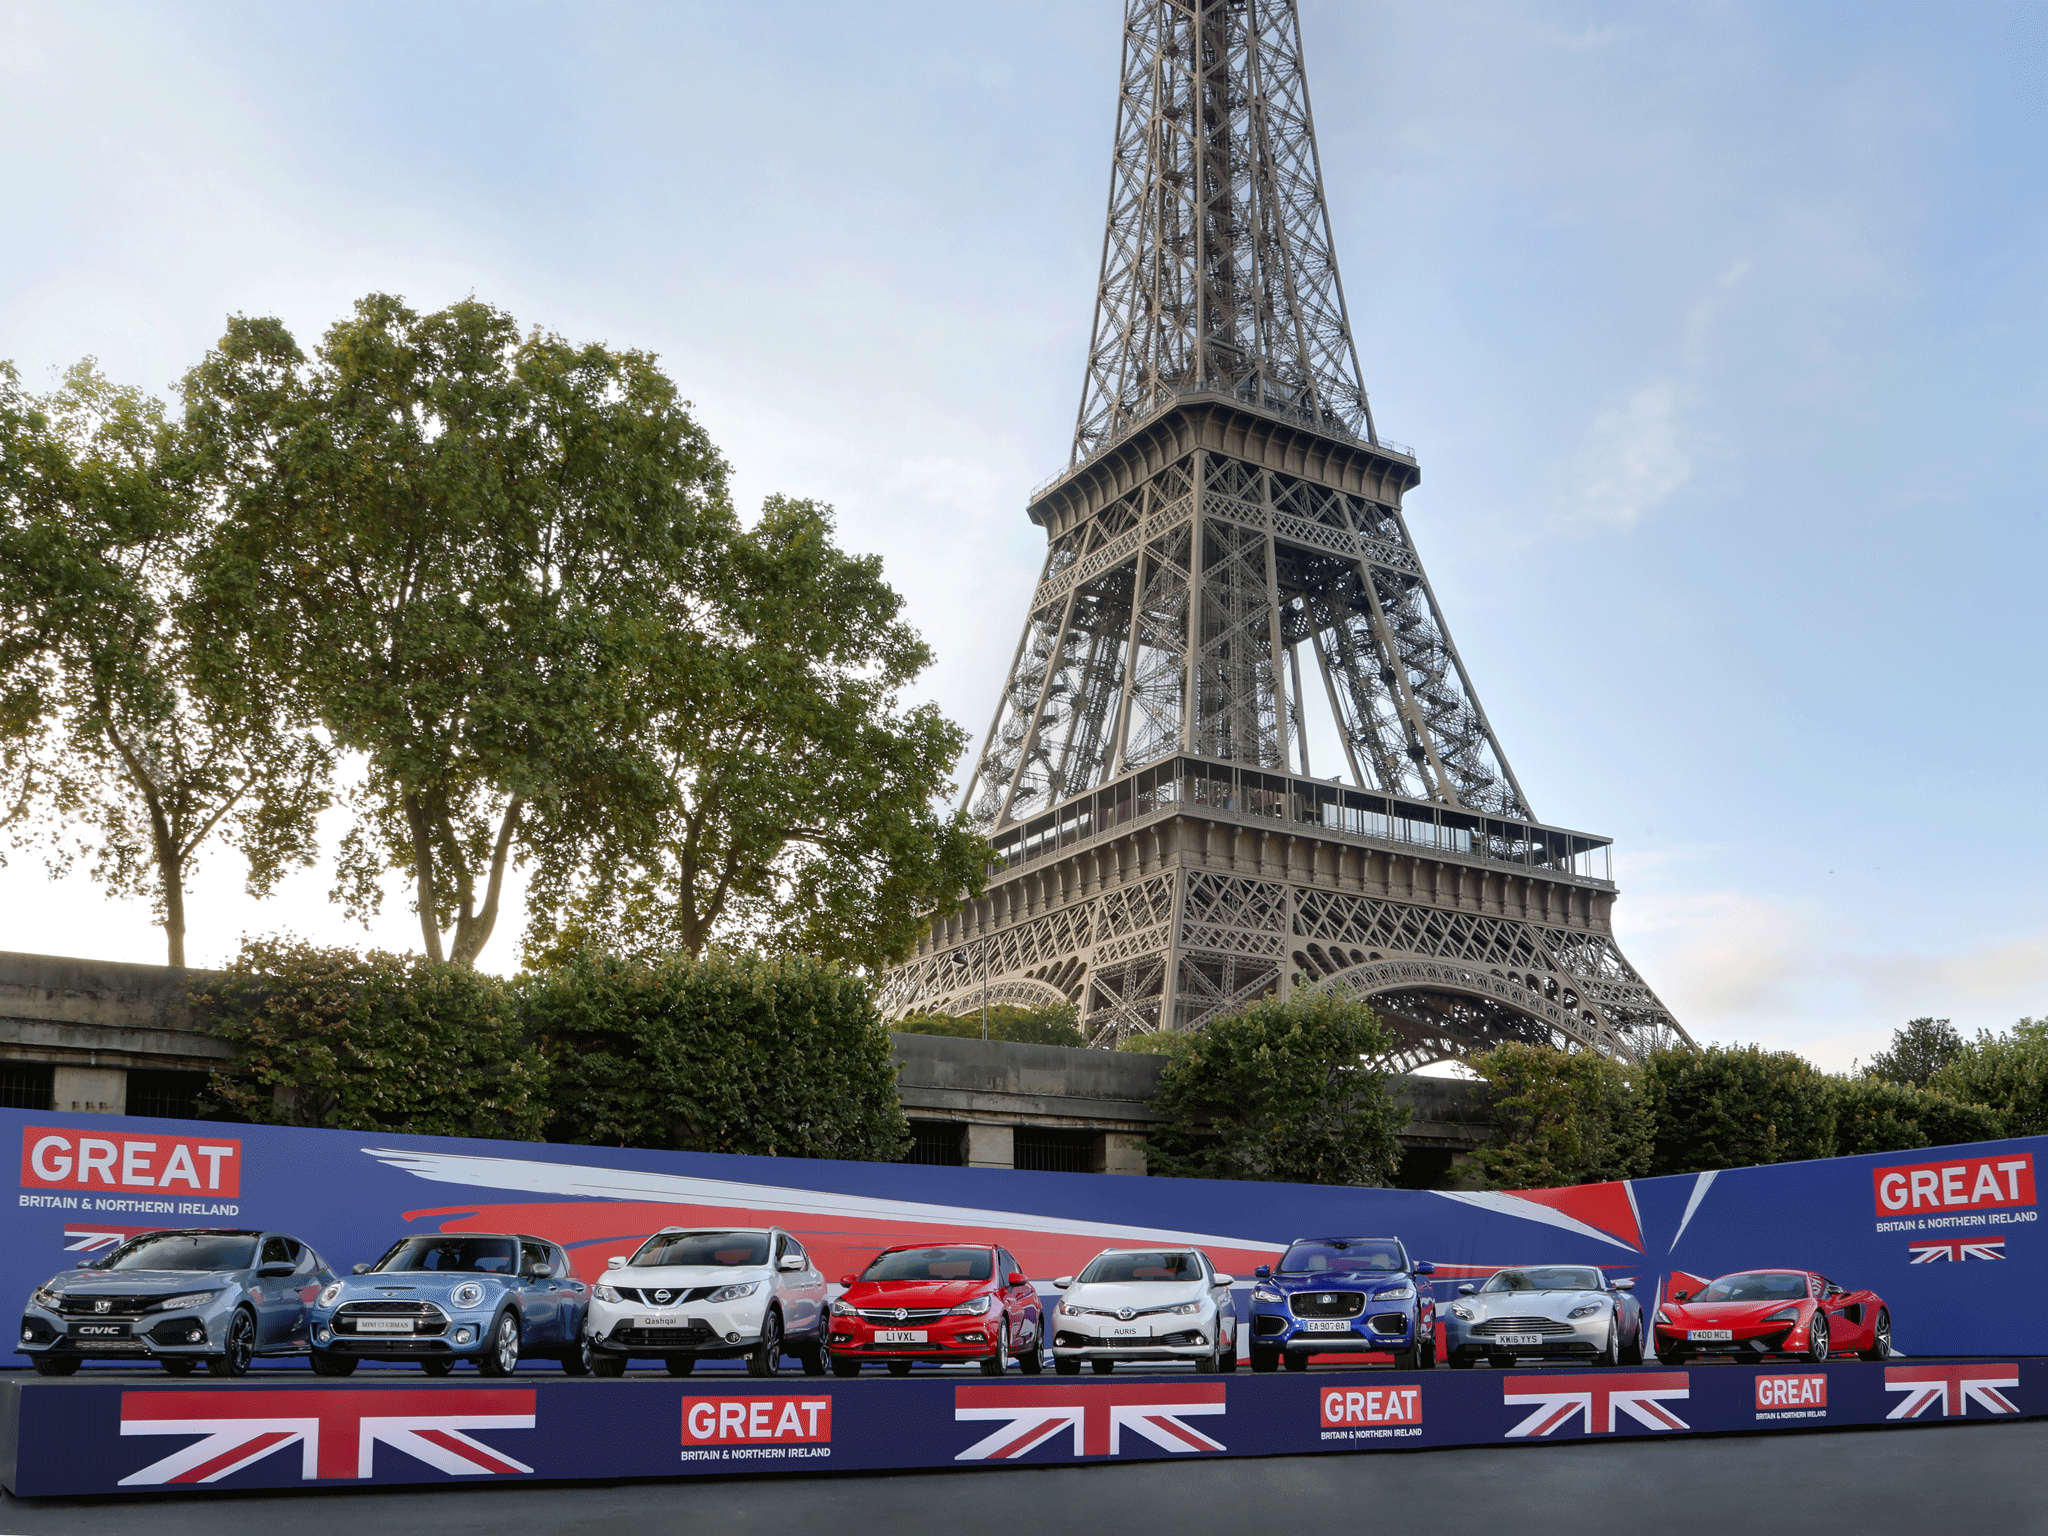 The ‘Great Britain’ auto event ahead of this year’s Paris Motor Show